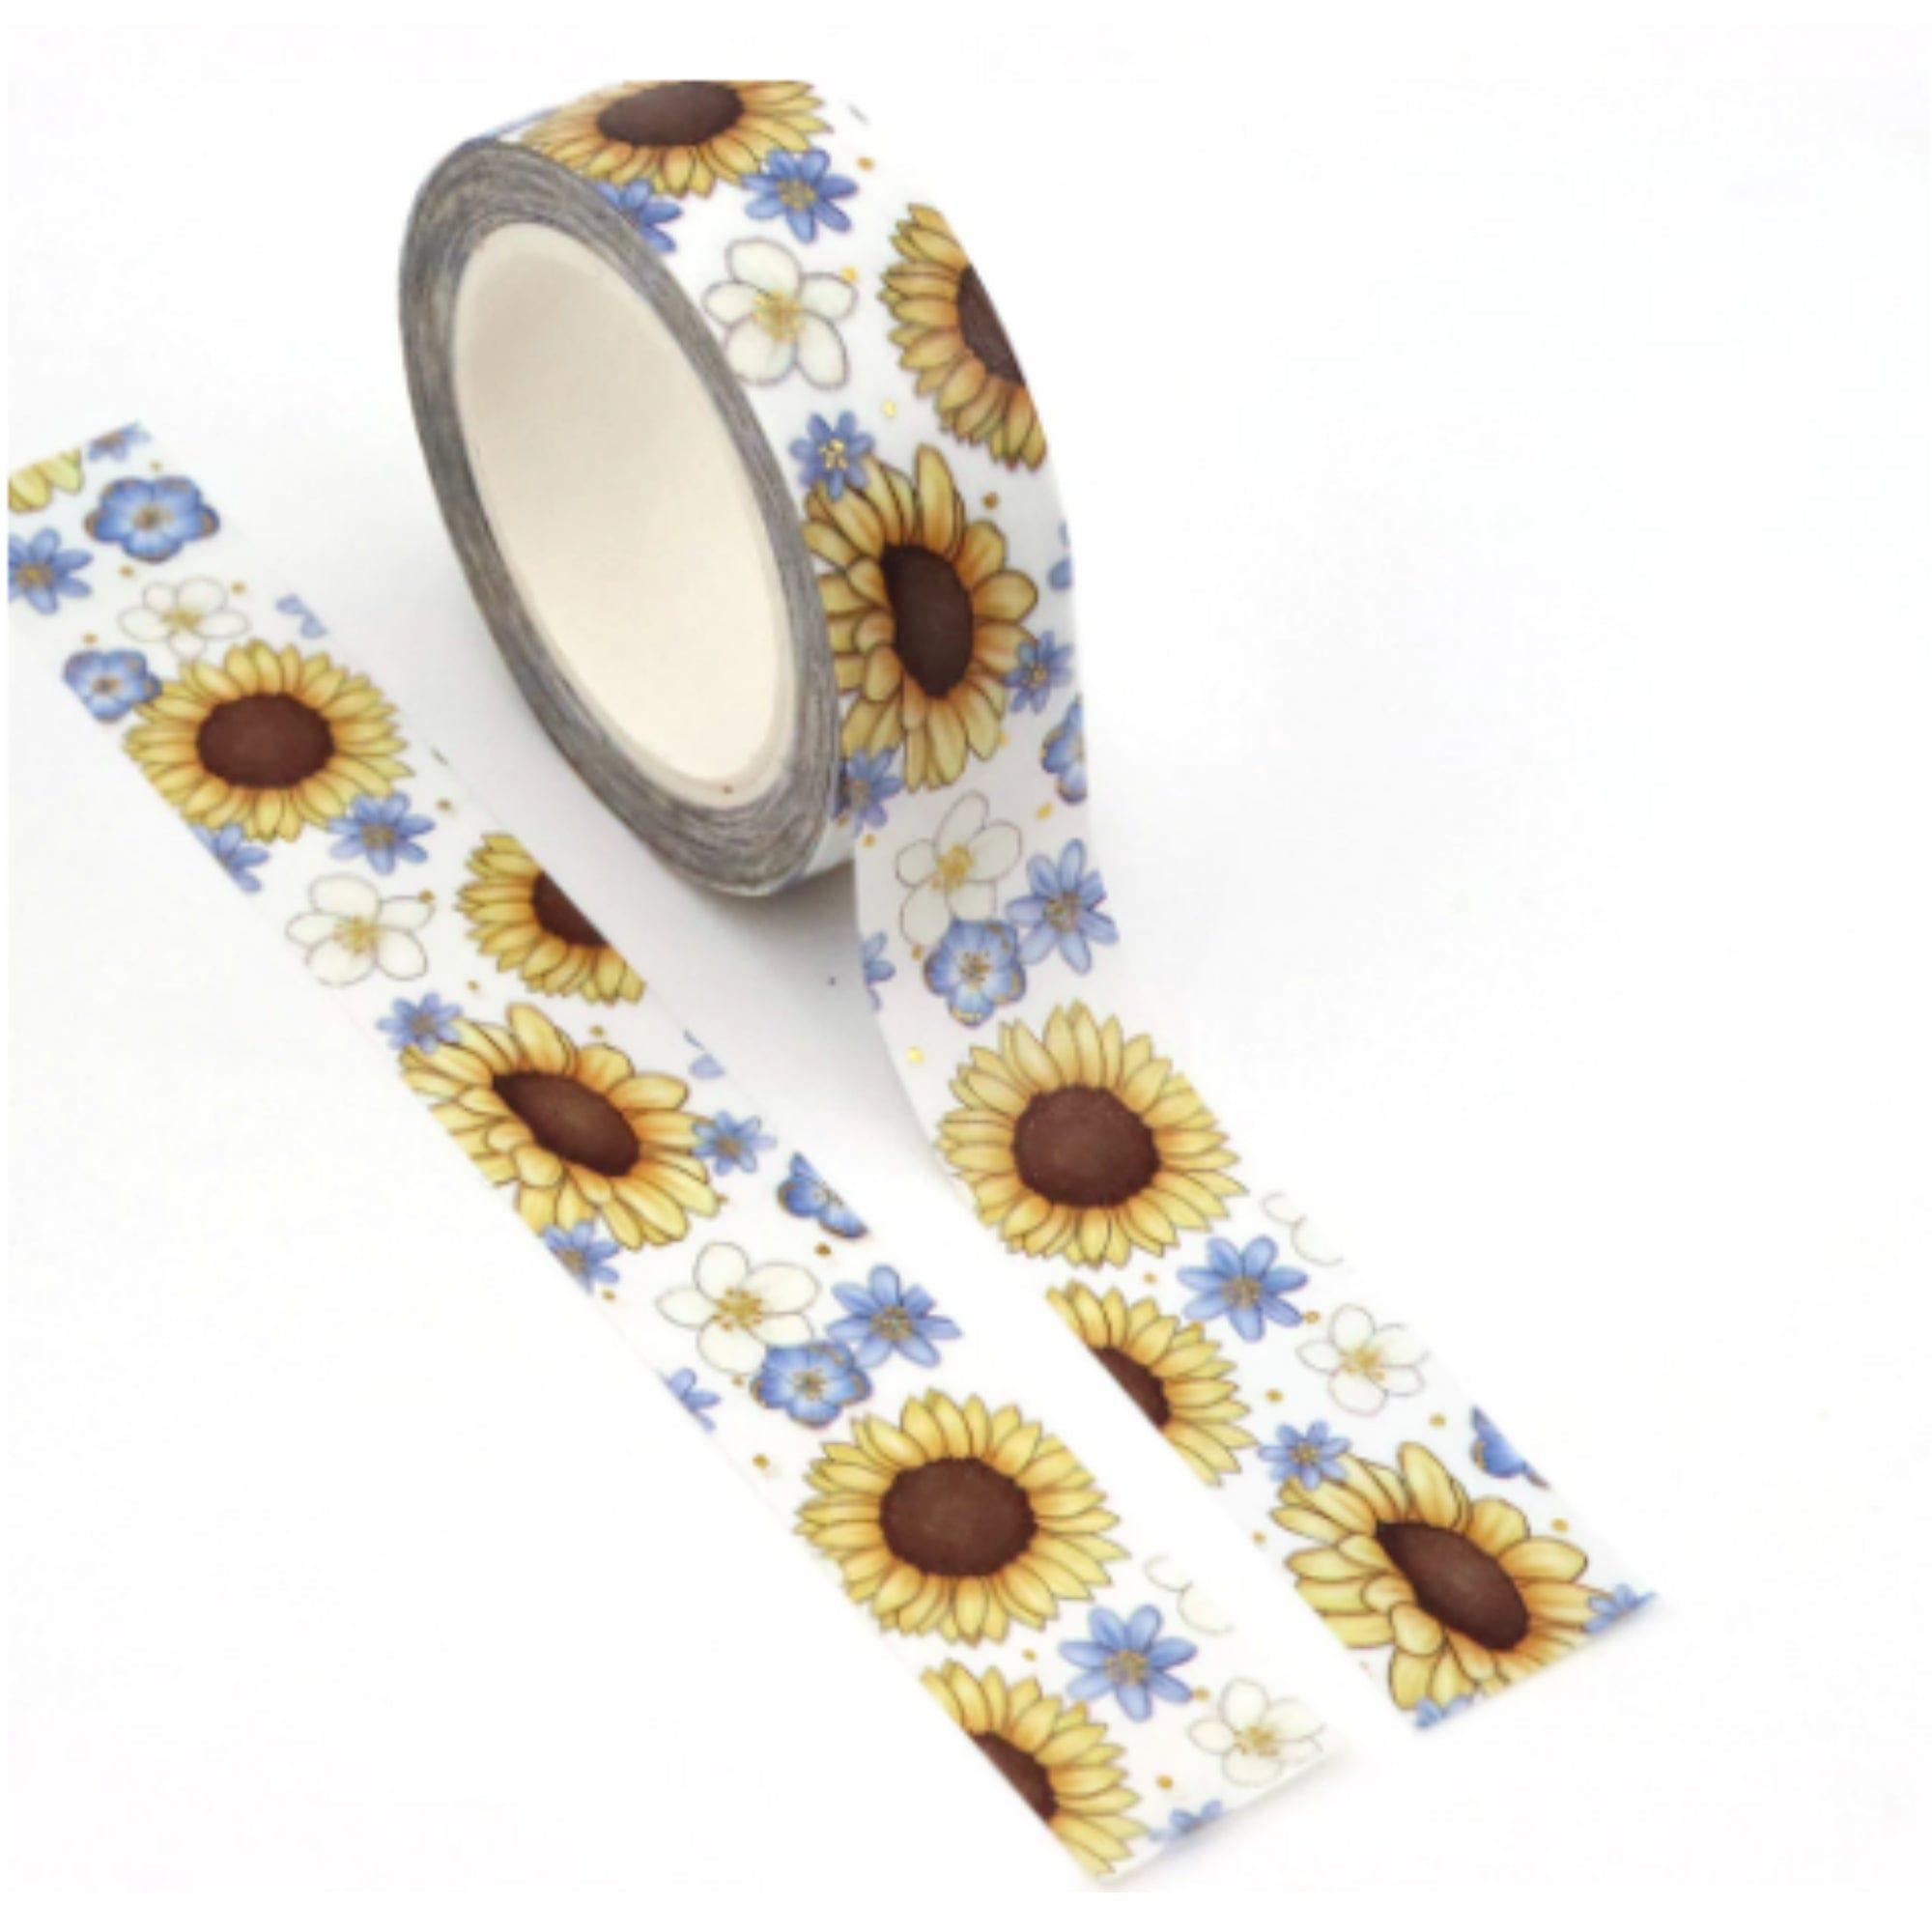 TW Collection Sunflowers Gold Foiled Scrapbook Washi Tape by SSC Designs - 15mm x 30 Feet - Scrapbook Supply Companies